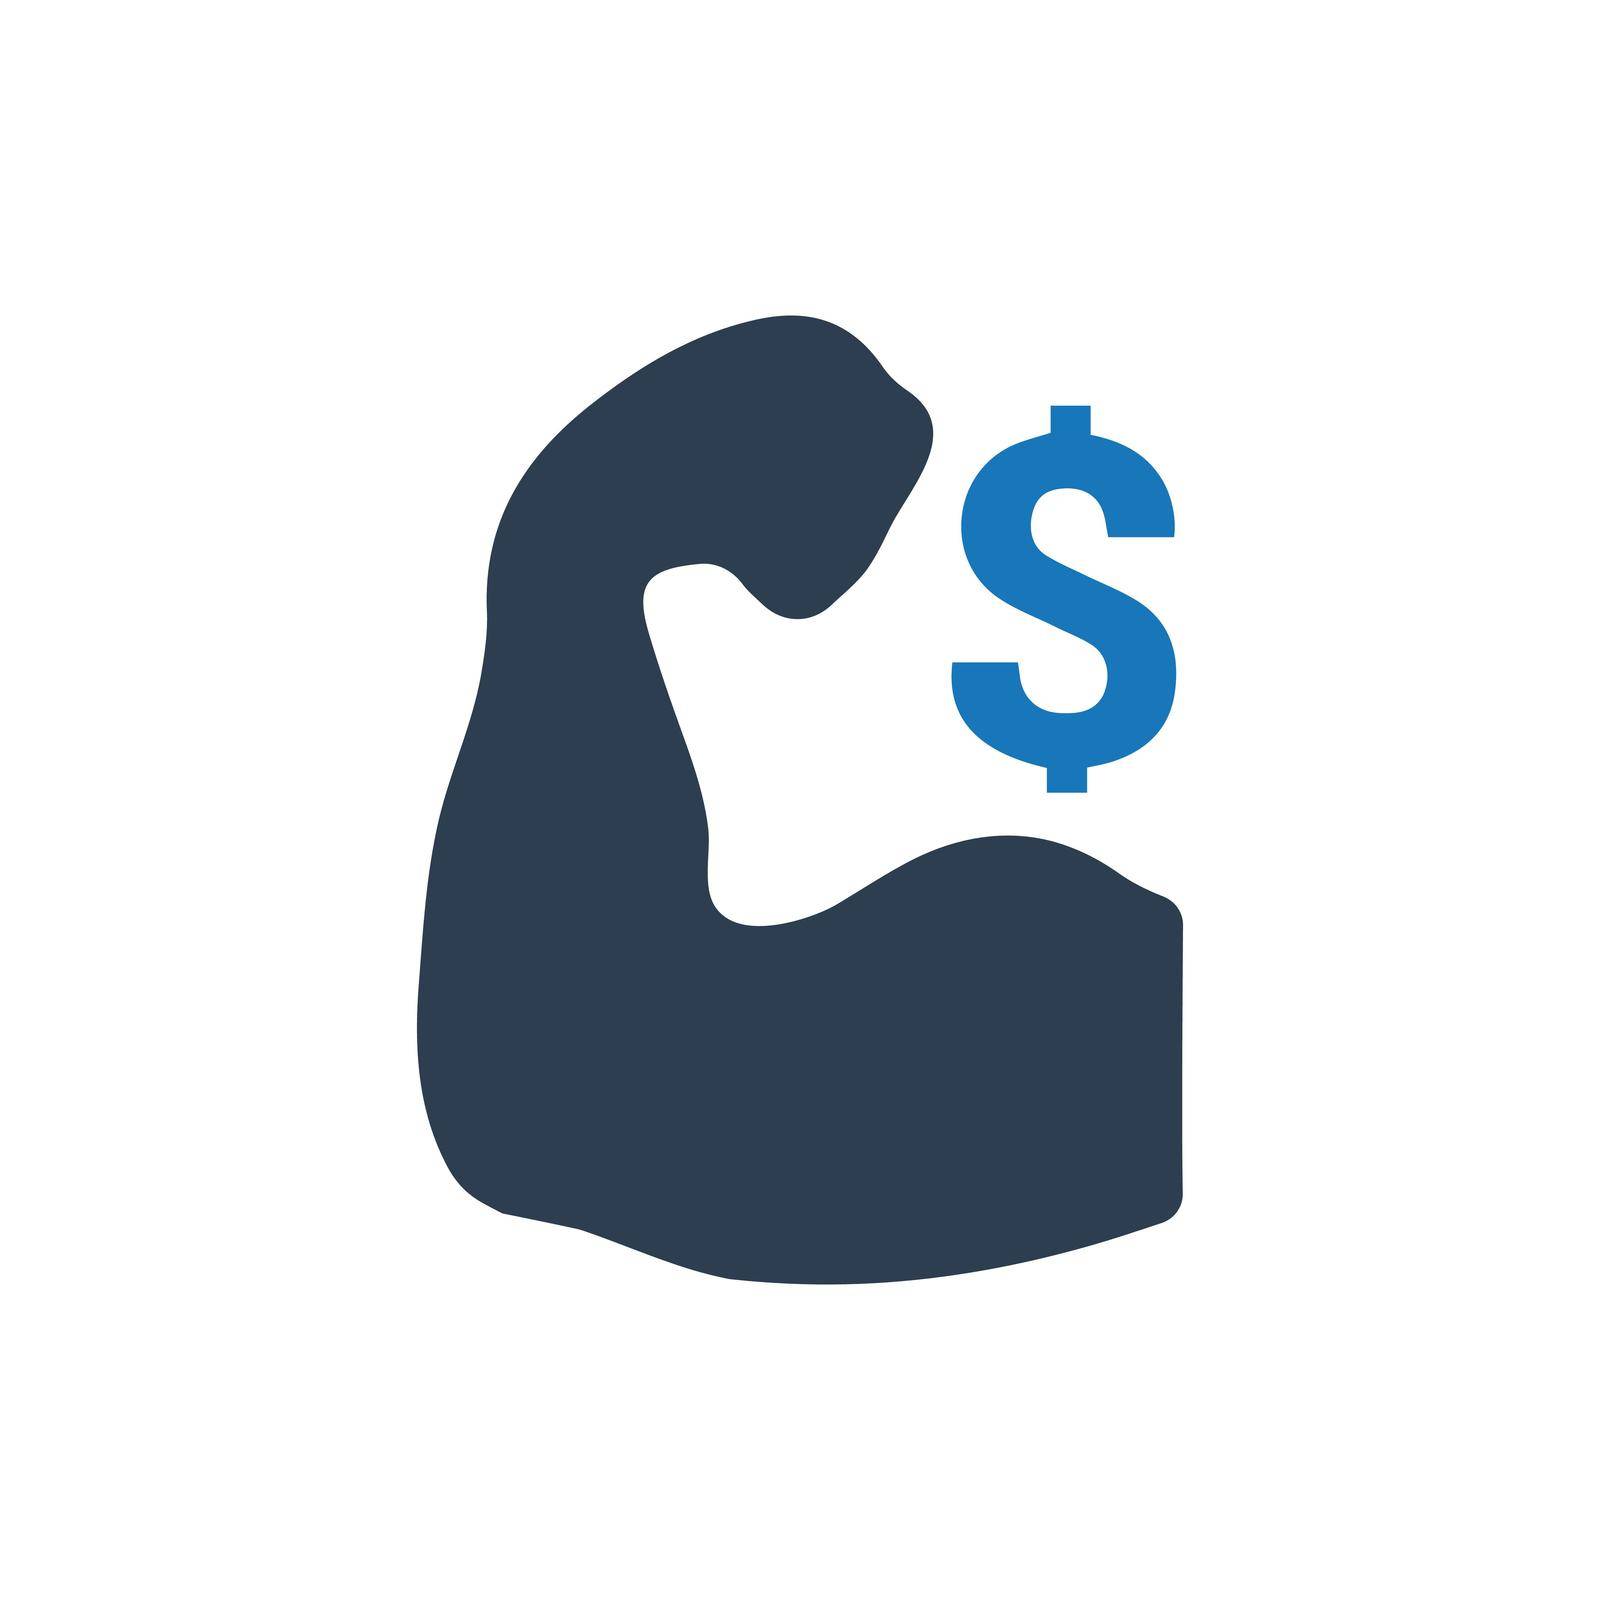 Financial Strength icon. Vector EPS file.